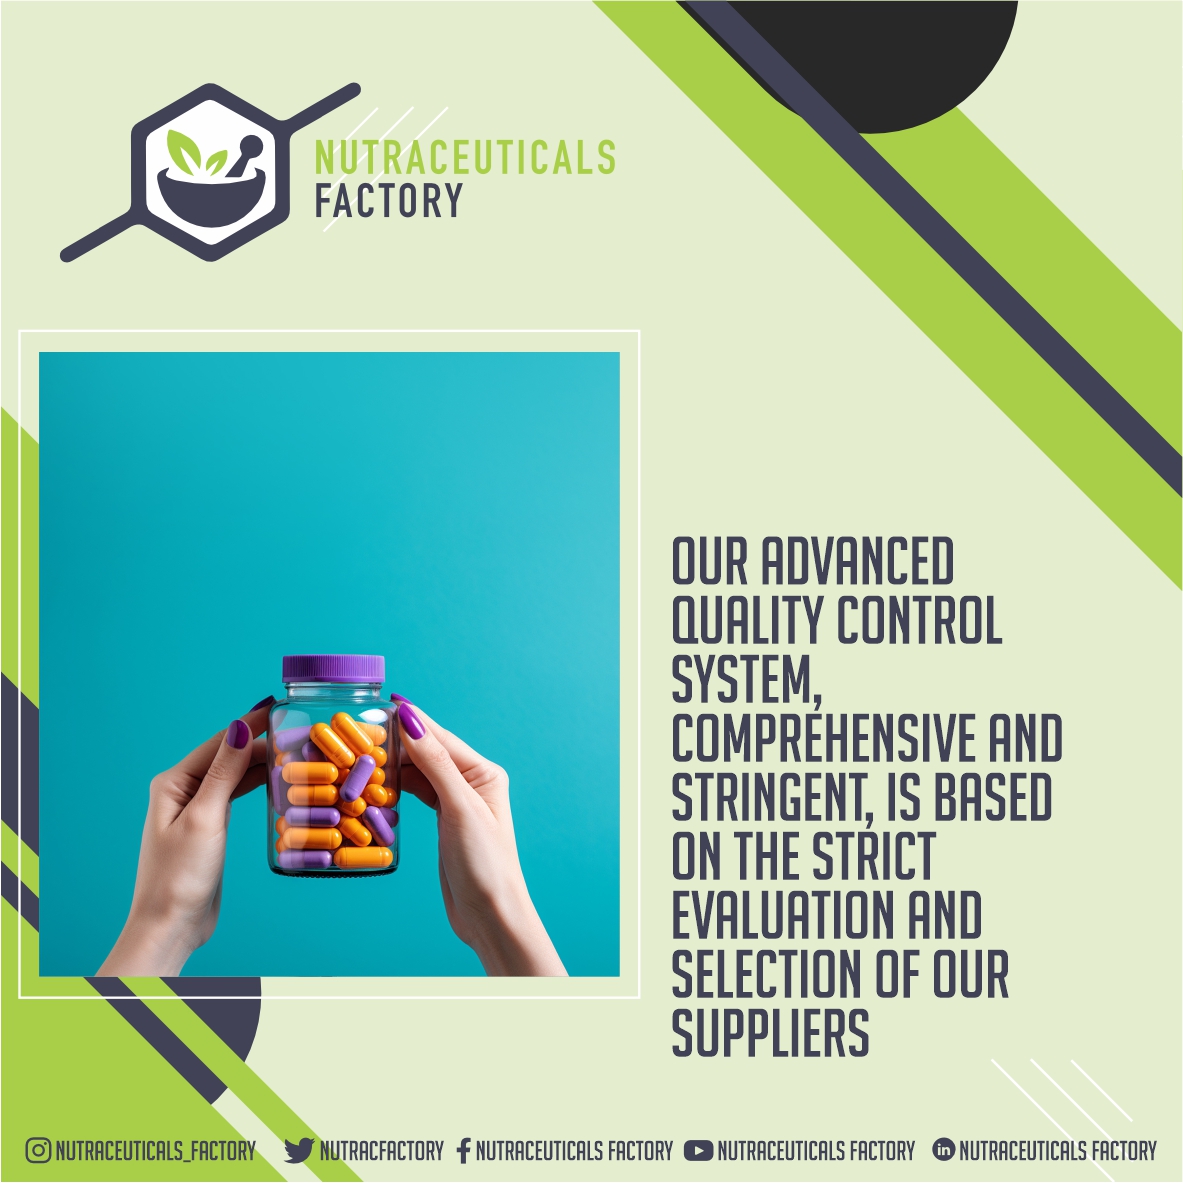 Our advanced Quality Control system, comprehensive and stringent
#NutraceuticalsFactory #Nutraceuticals #usa #florida #privatelabeling #productdevelopment #manufacturing #privatelabelnutraceuticals #nutraceuticalsupplement #manufacturer